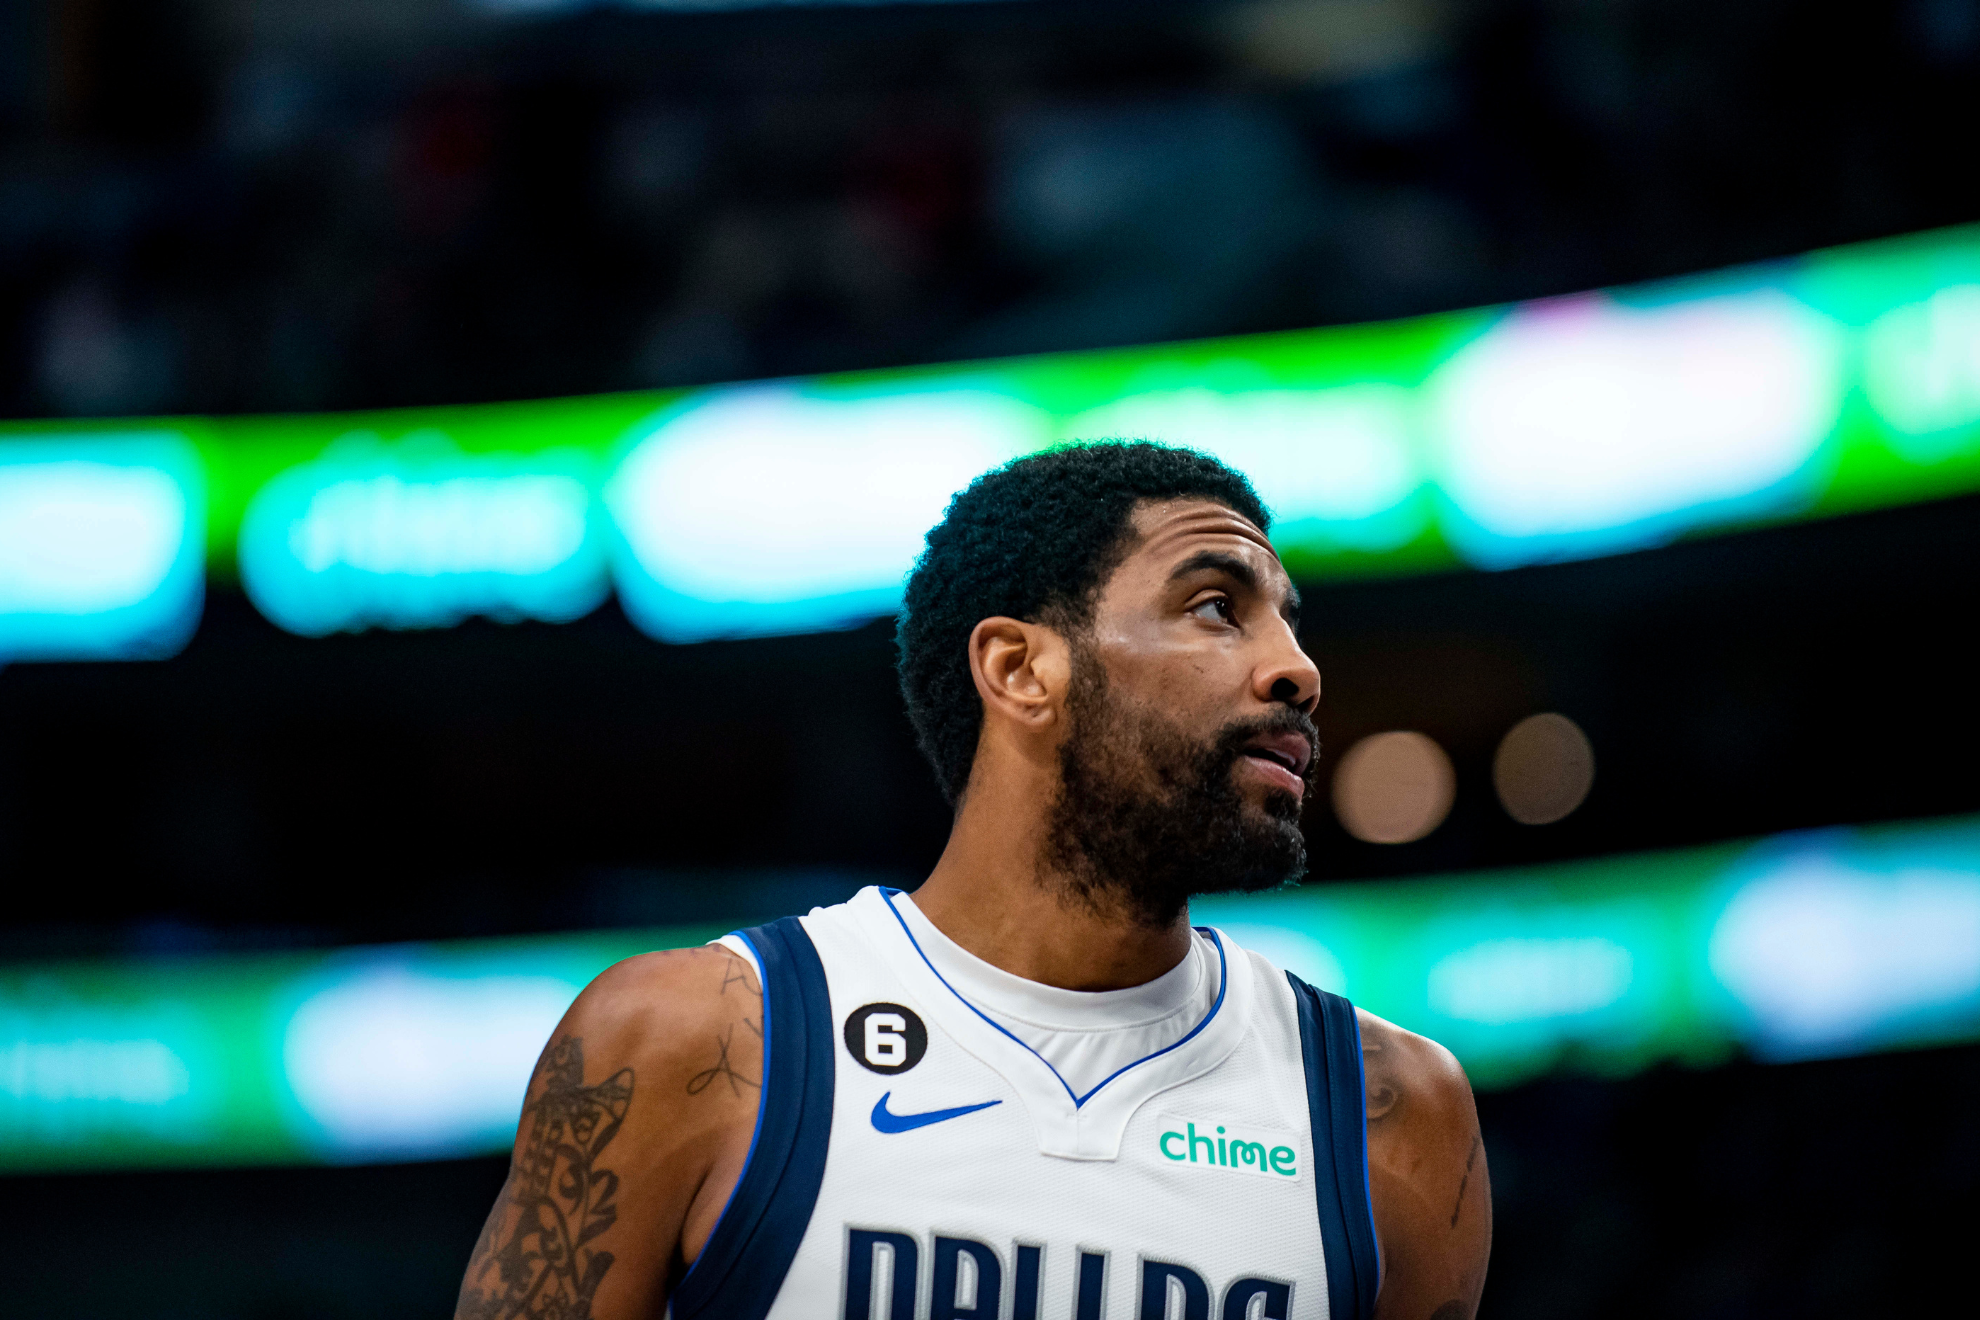 Irving averaged better than 26 points per game for the fourth consecutive season.